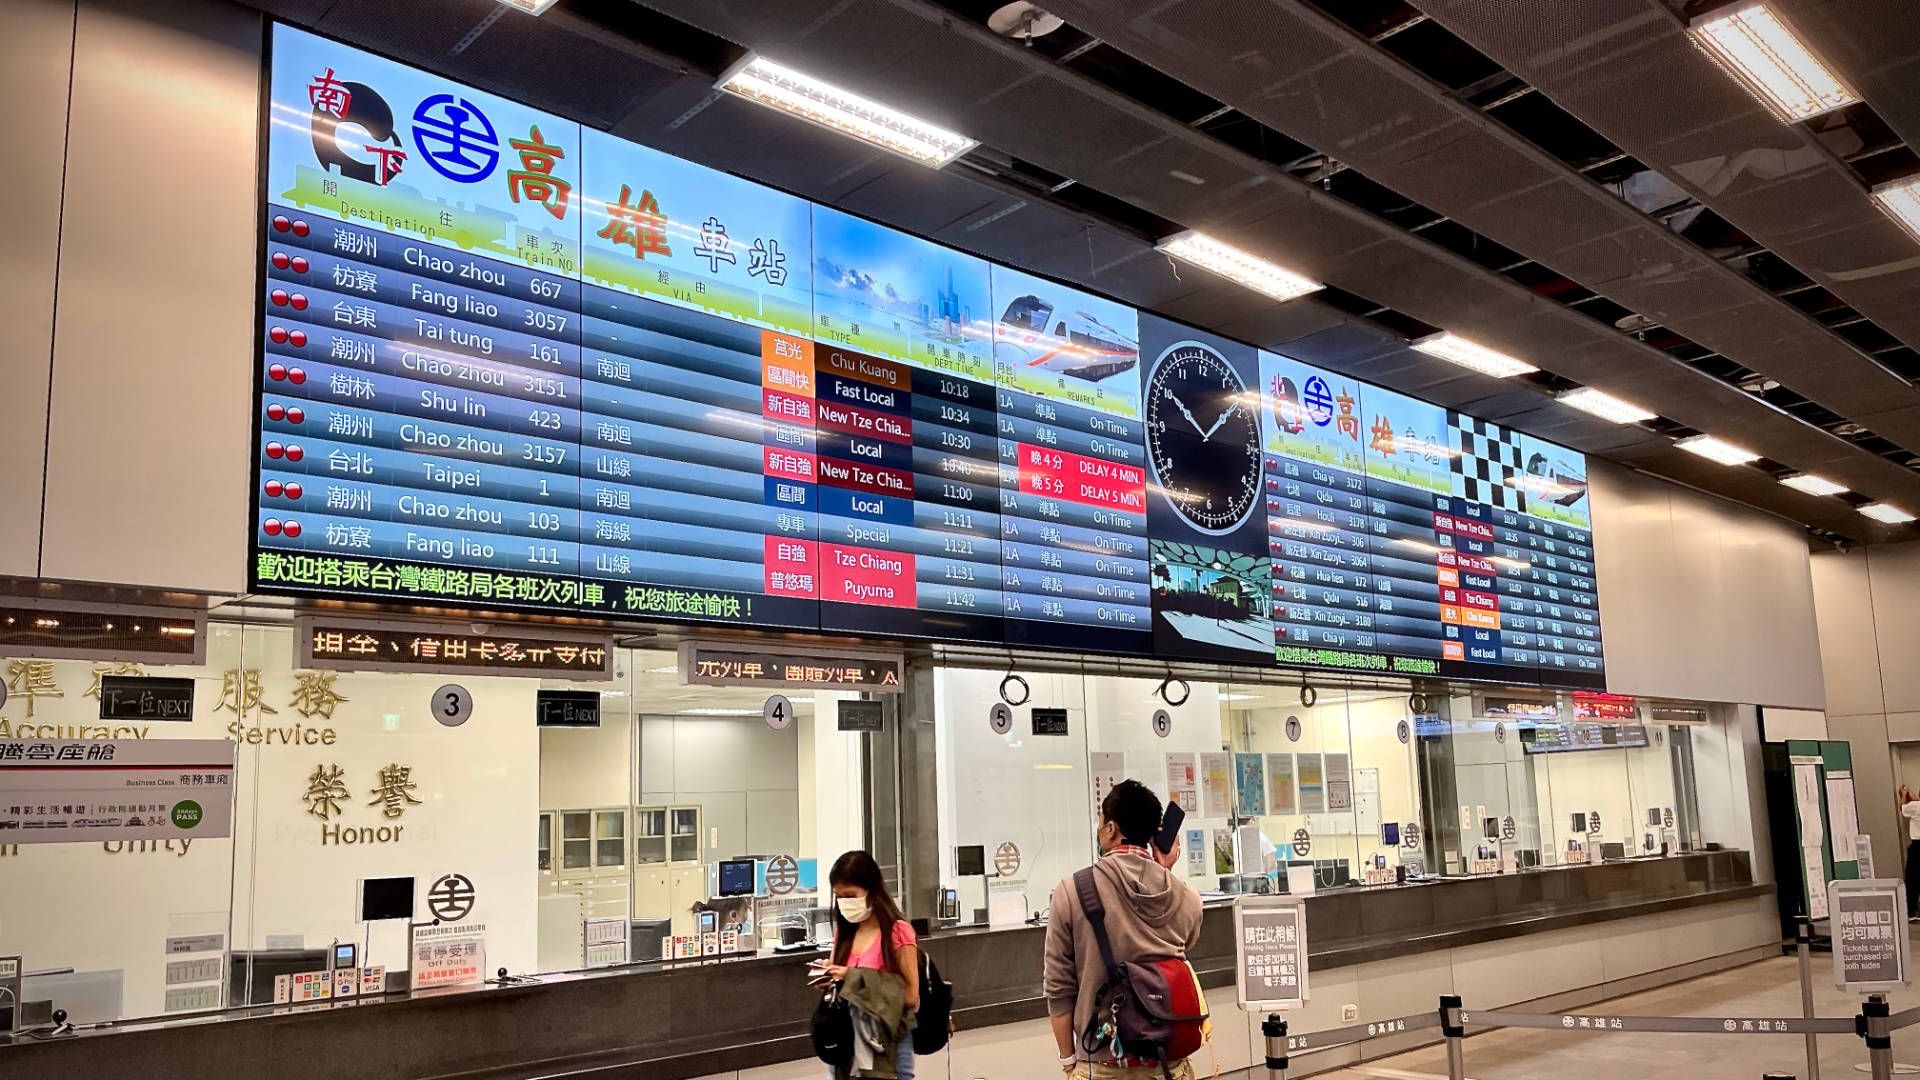 A large electronic departures board above the ticketing office.